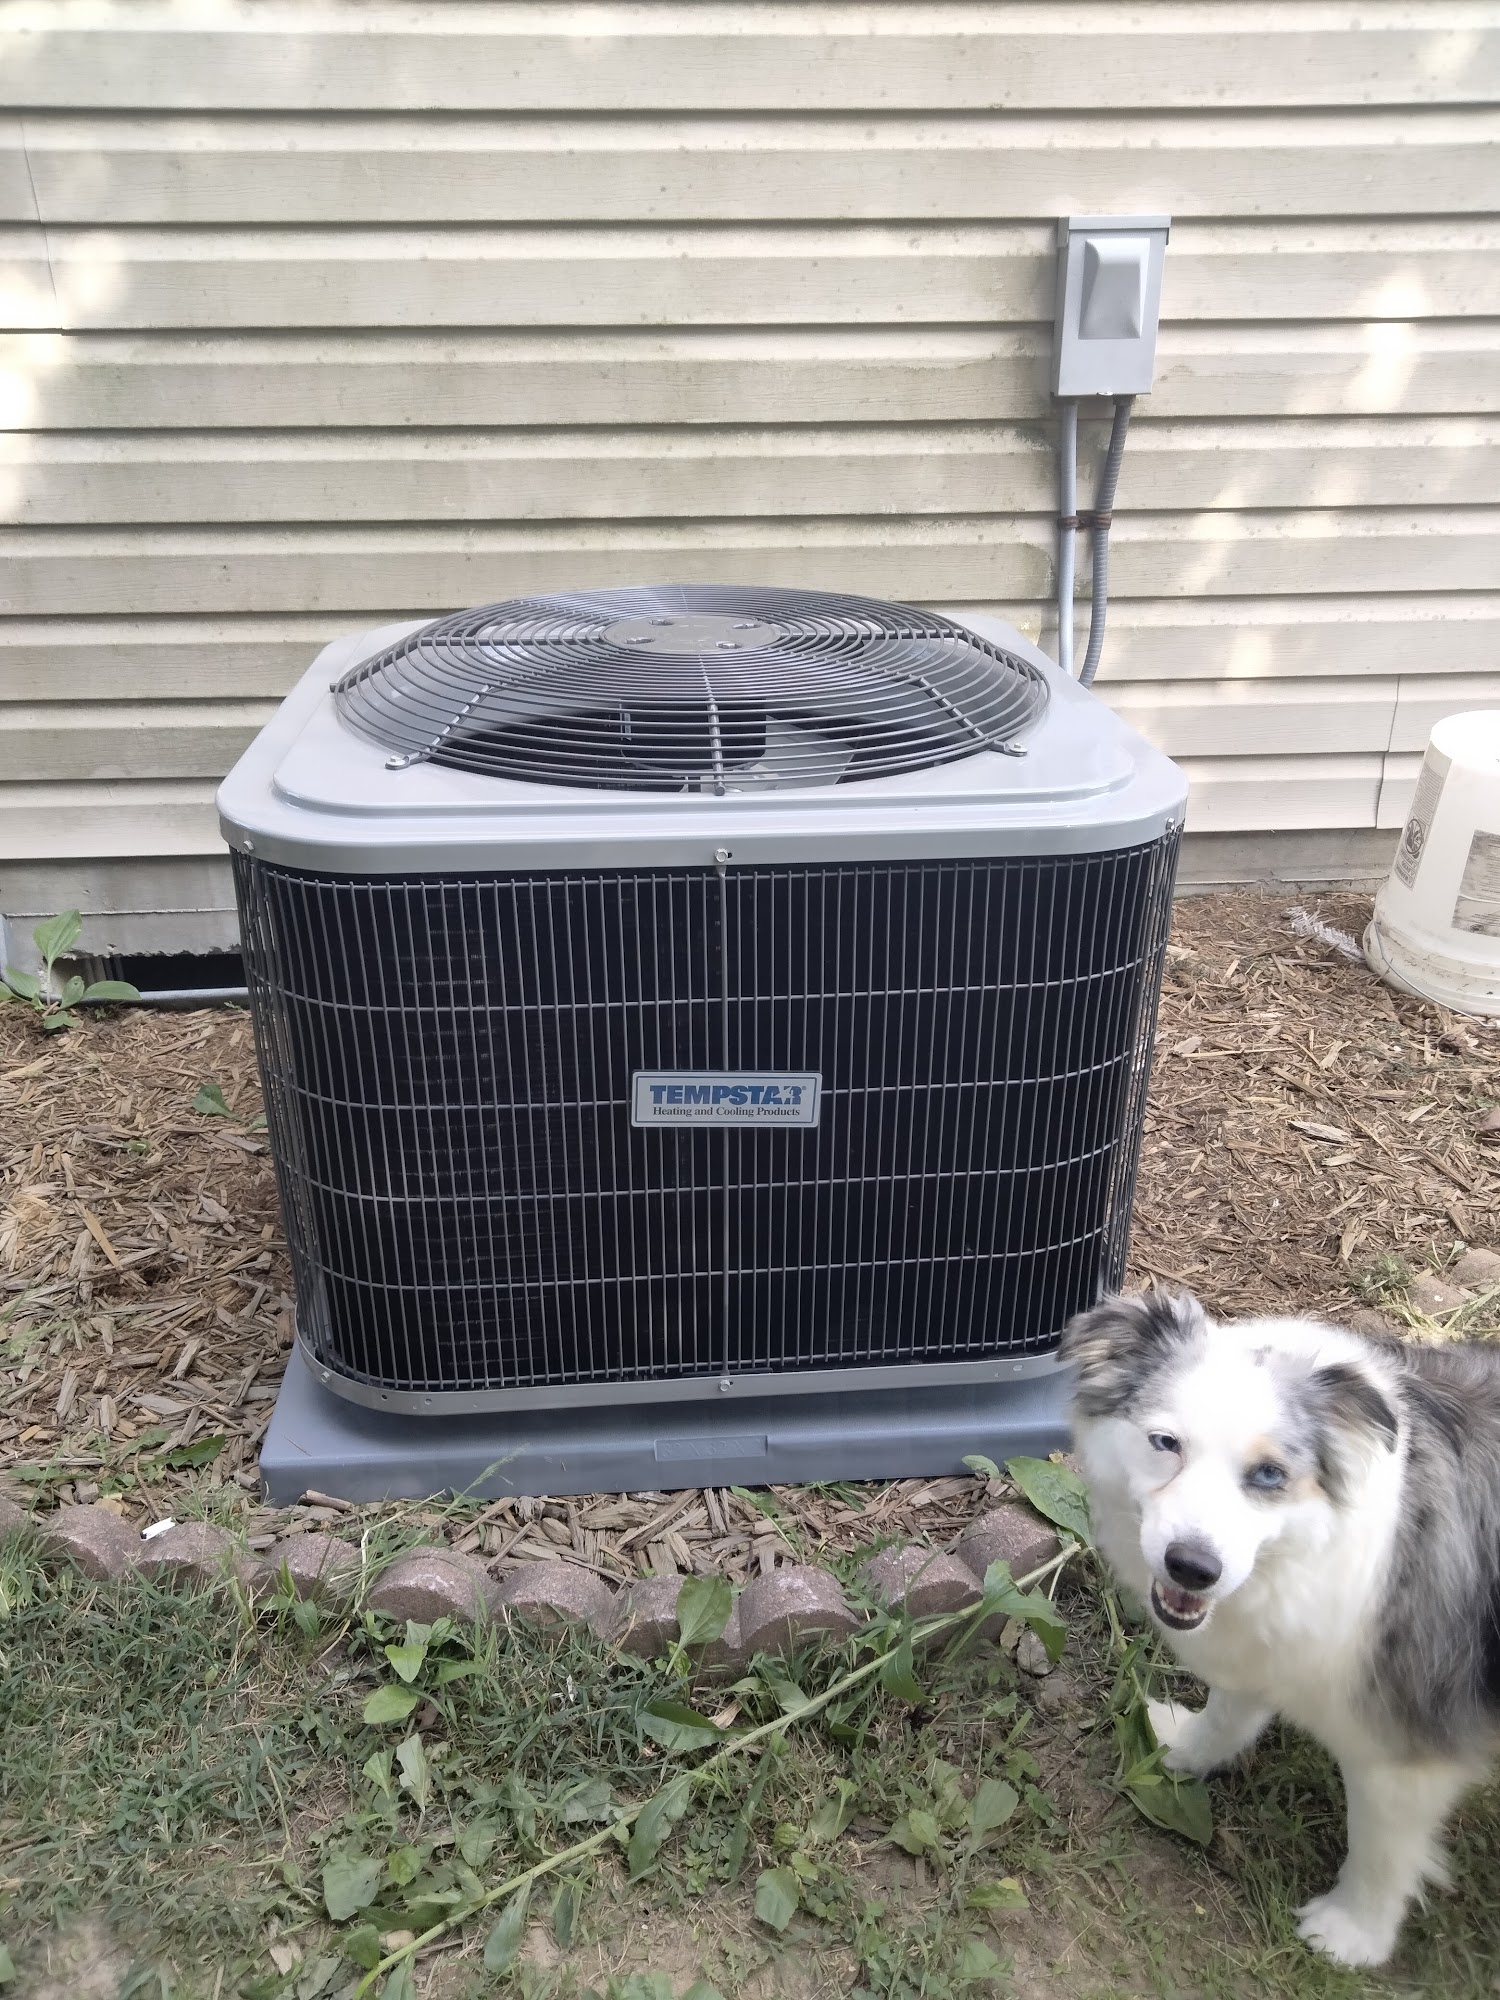 Dale Schuman Heating Cooling 14255 N County Rd 525 E, Batesville Indiana 47006